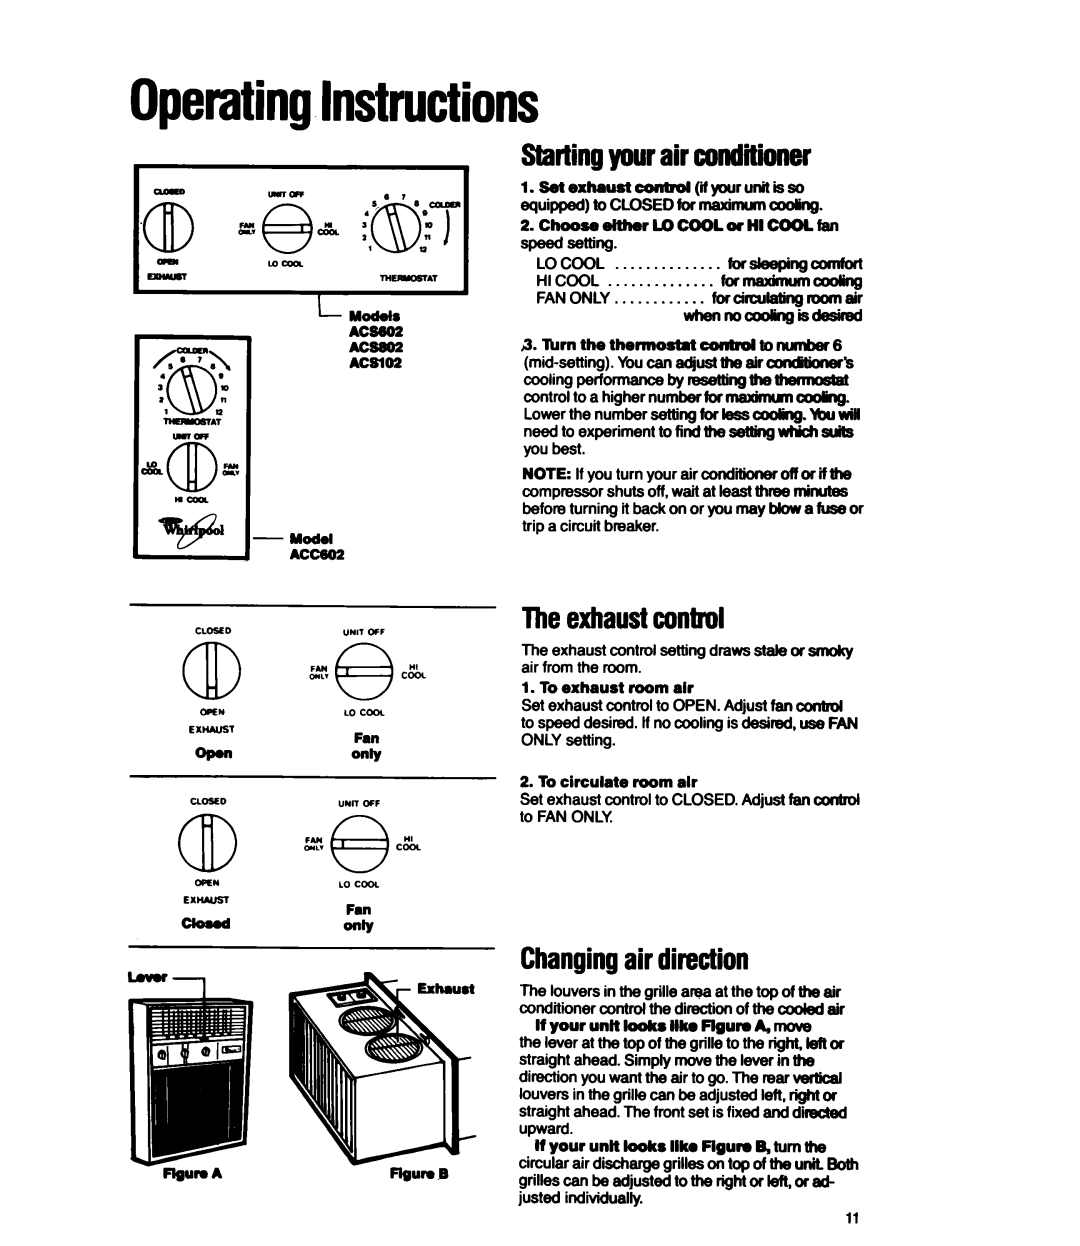 Whirlpool ACC602, ACS802 manual OperatingInstructions, Startingyourair conditioner, Theexhaustcontrol, Changingair direction 